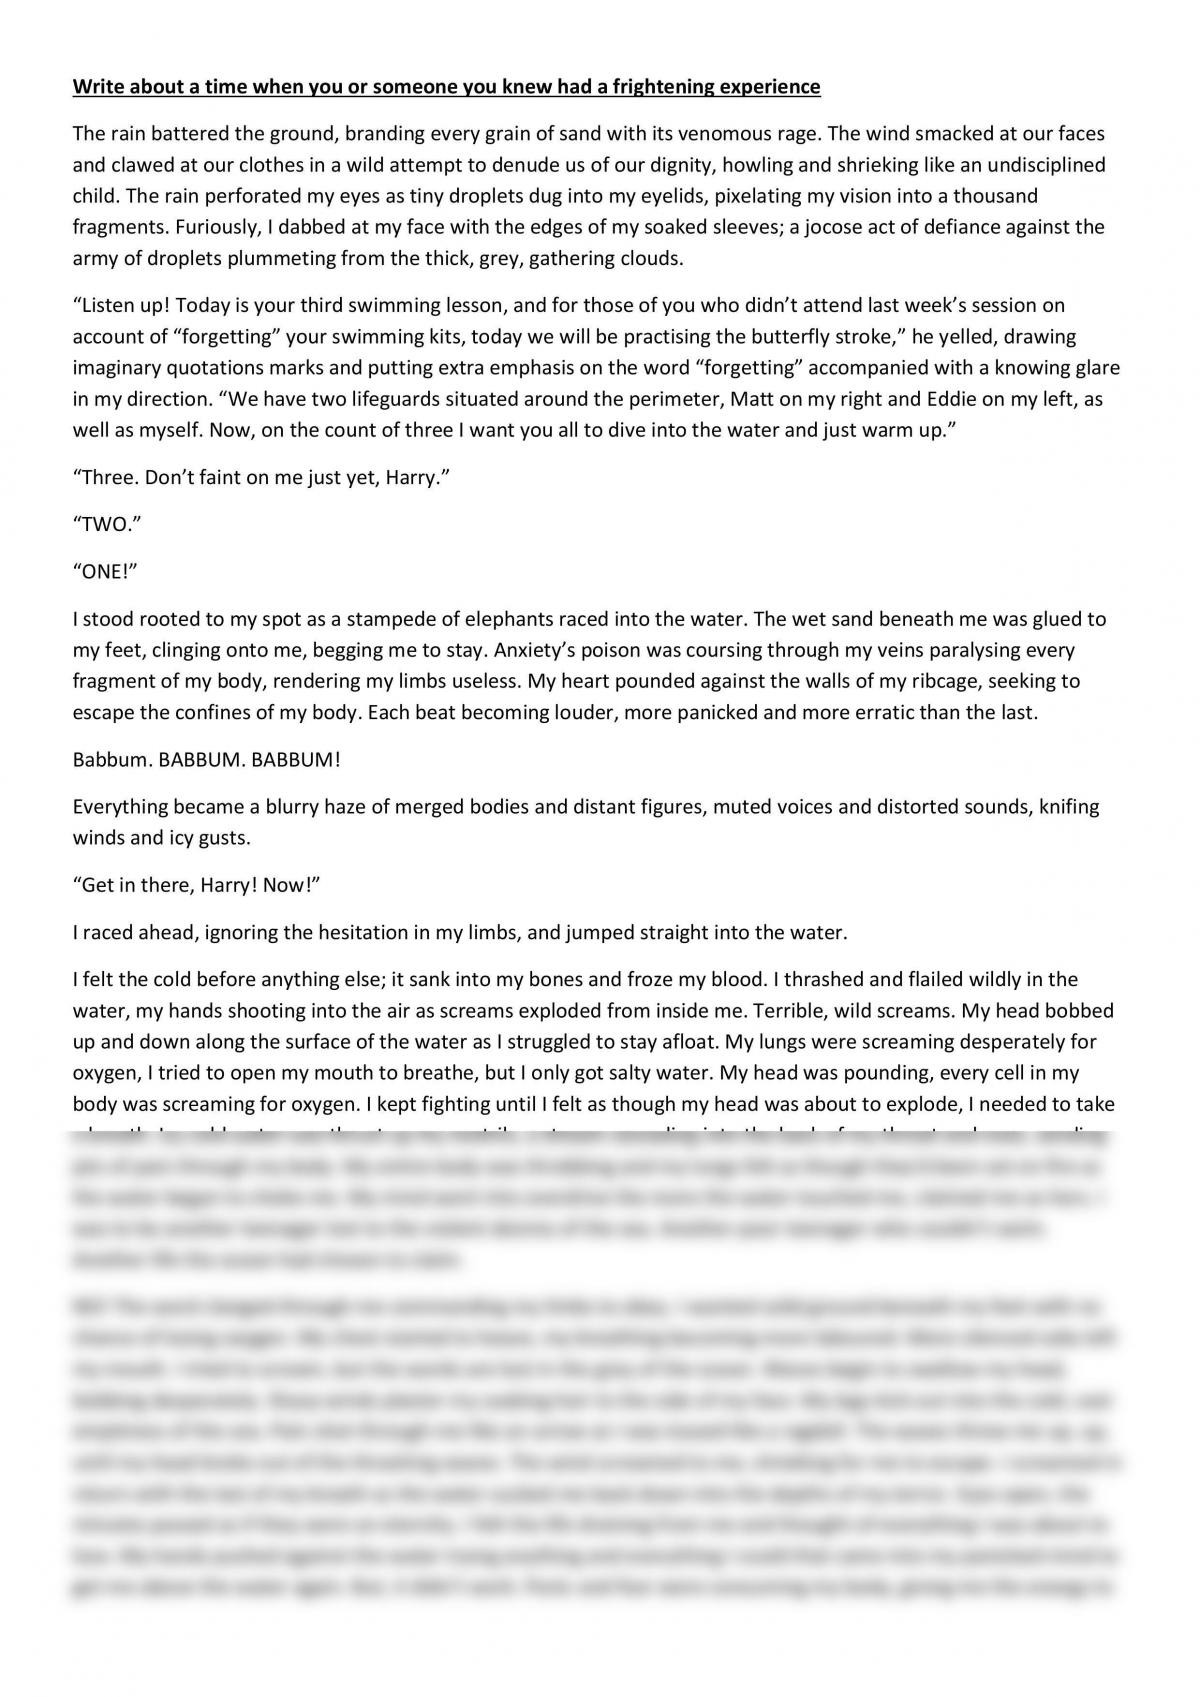 a frightening experience essay 100 words